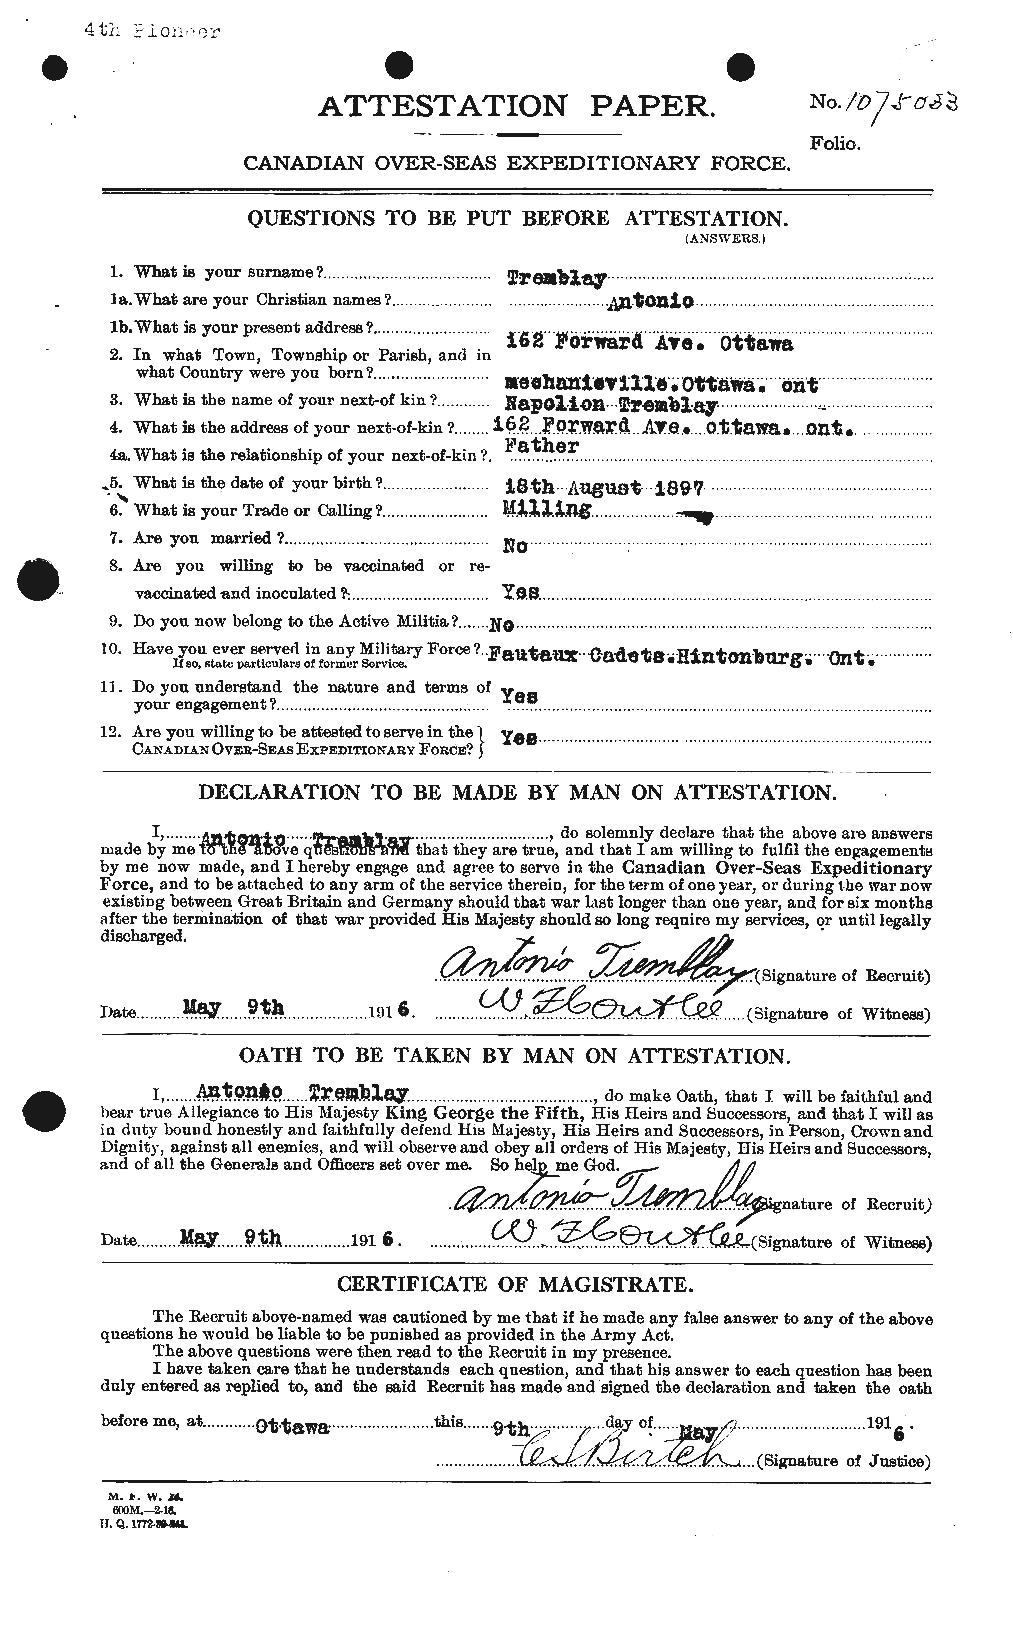 Personnel Records of the First World War - CEF 638946a